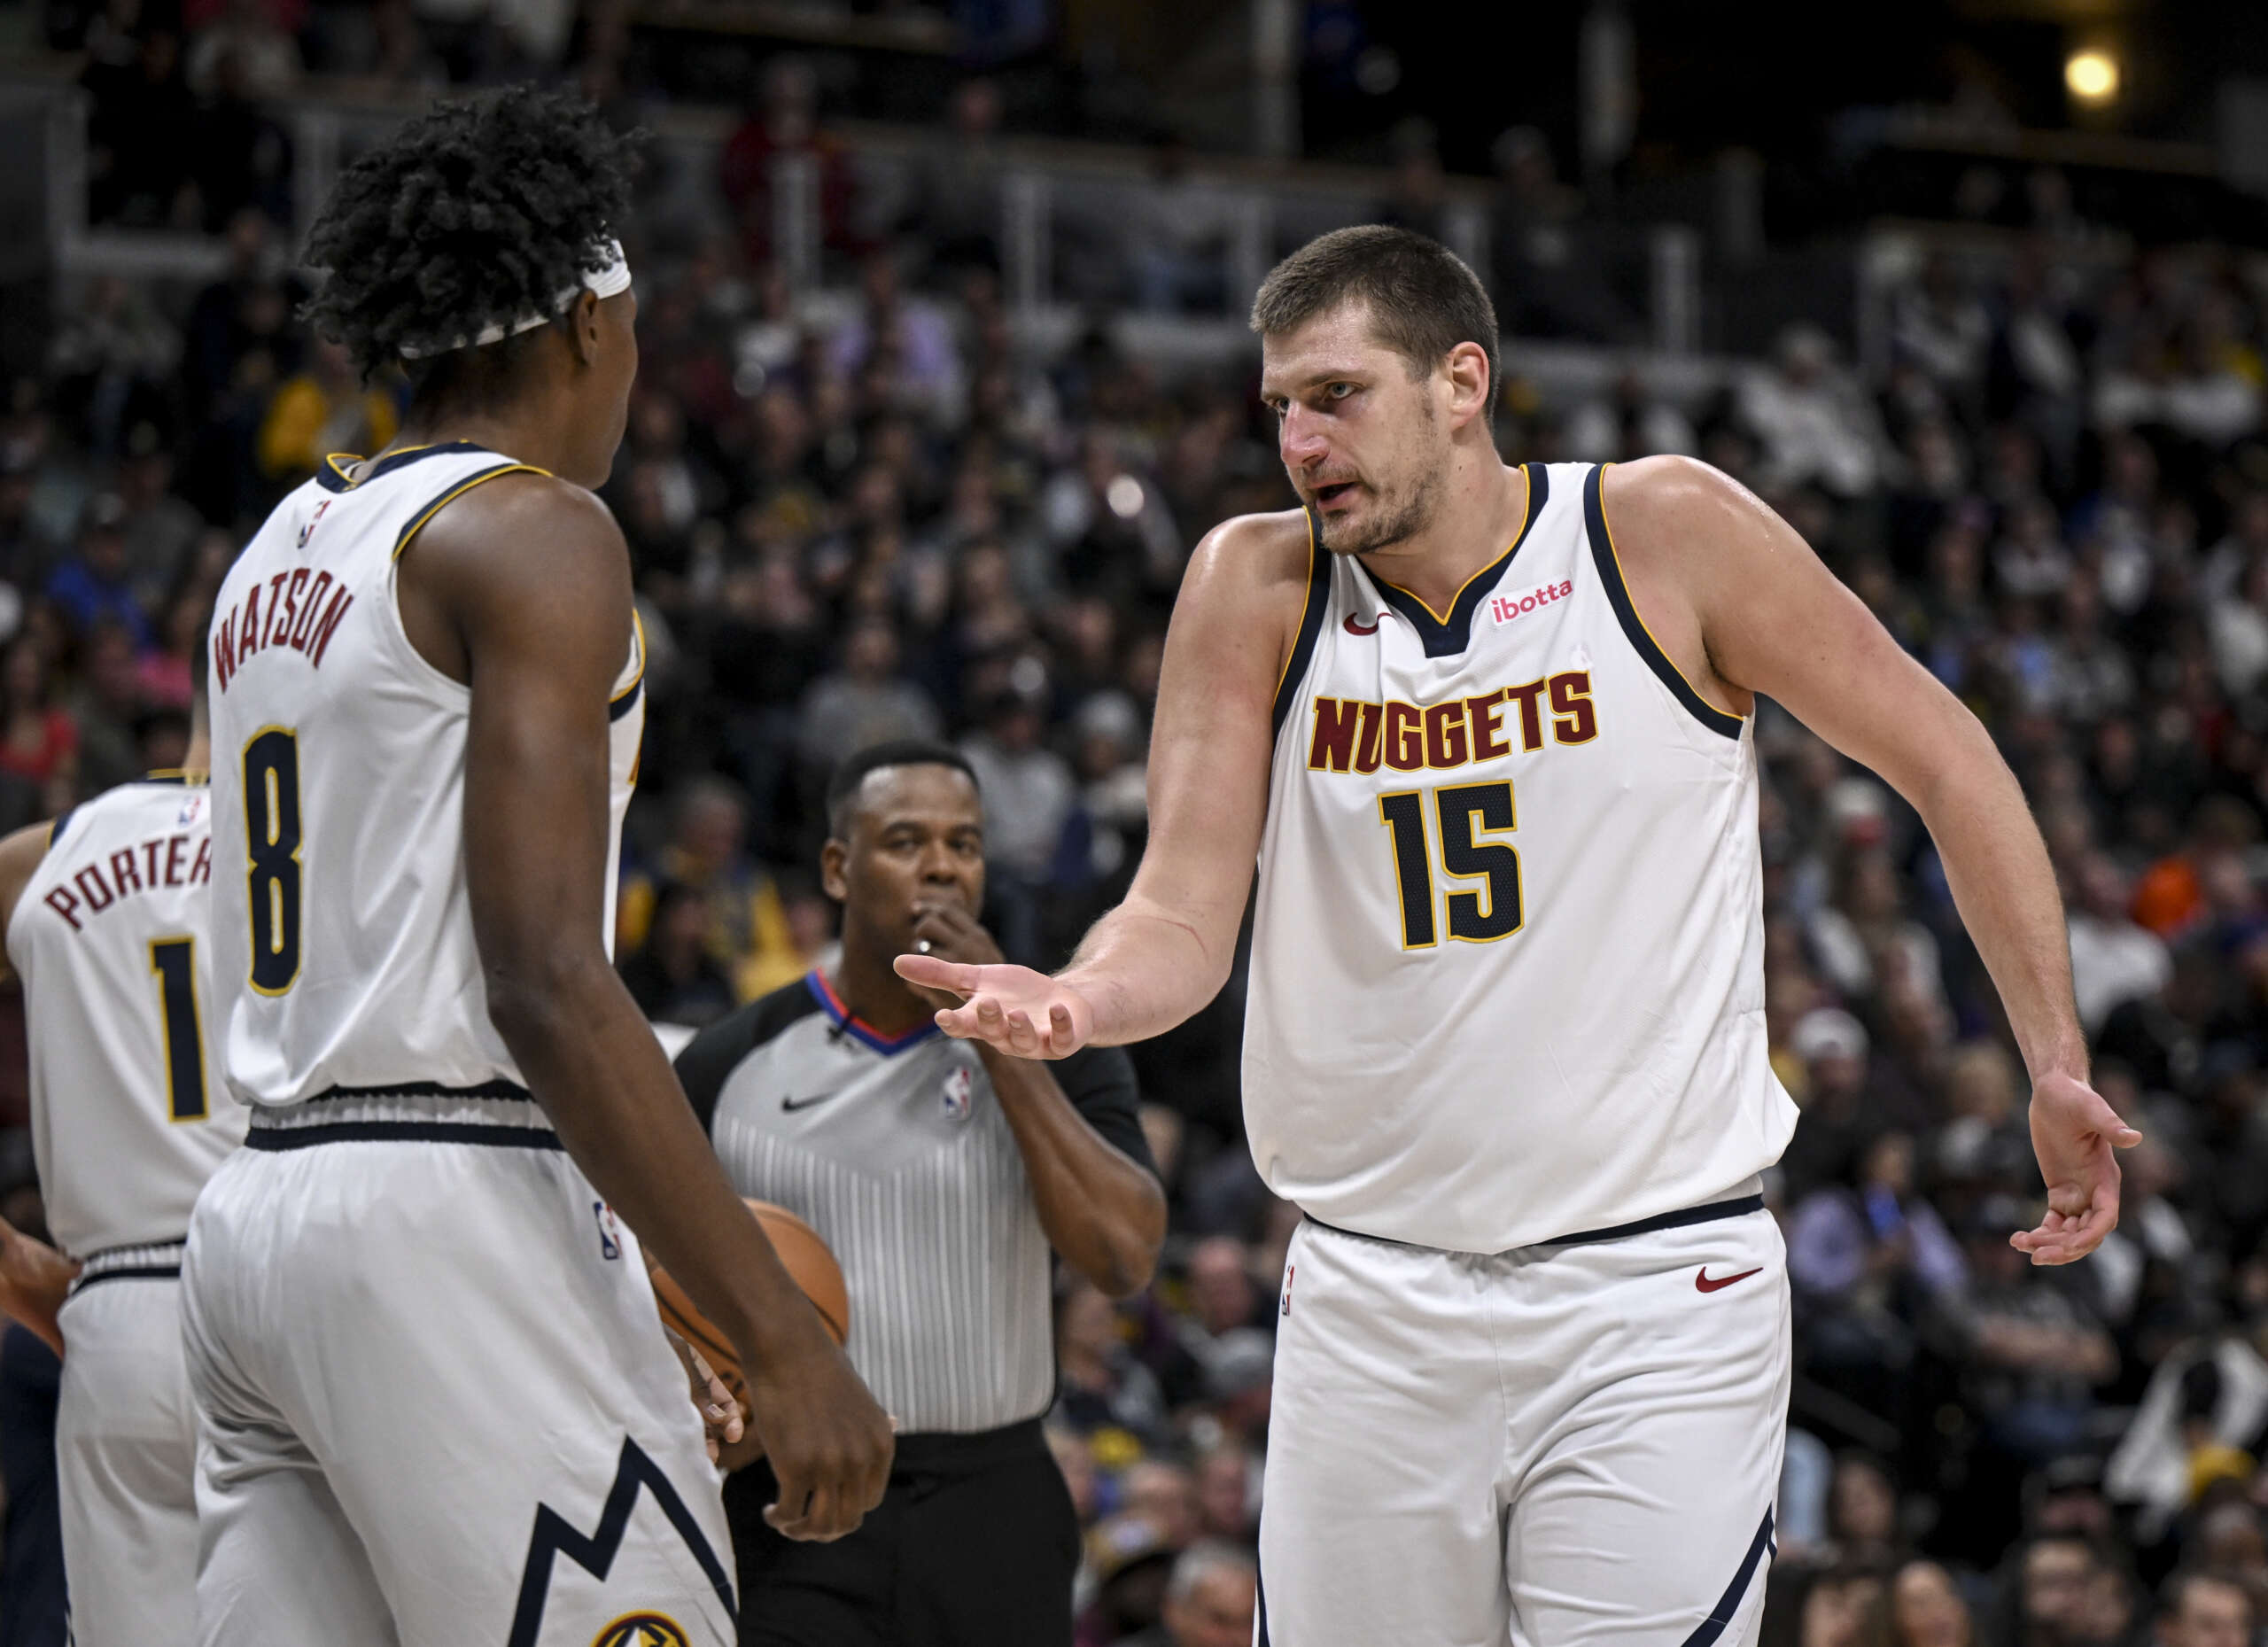 Nuggets Journal: Nikola Jokic makes rare commercial appearance with Peyton Watson: “We were out there clowning all day”